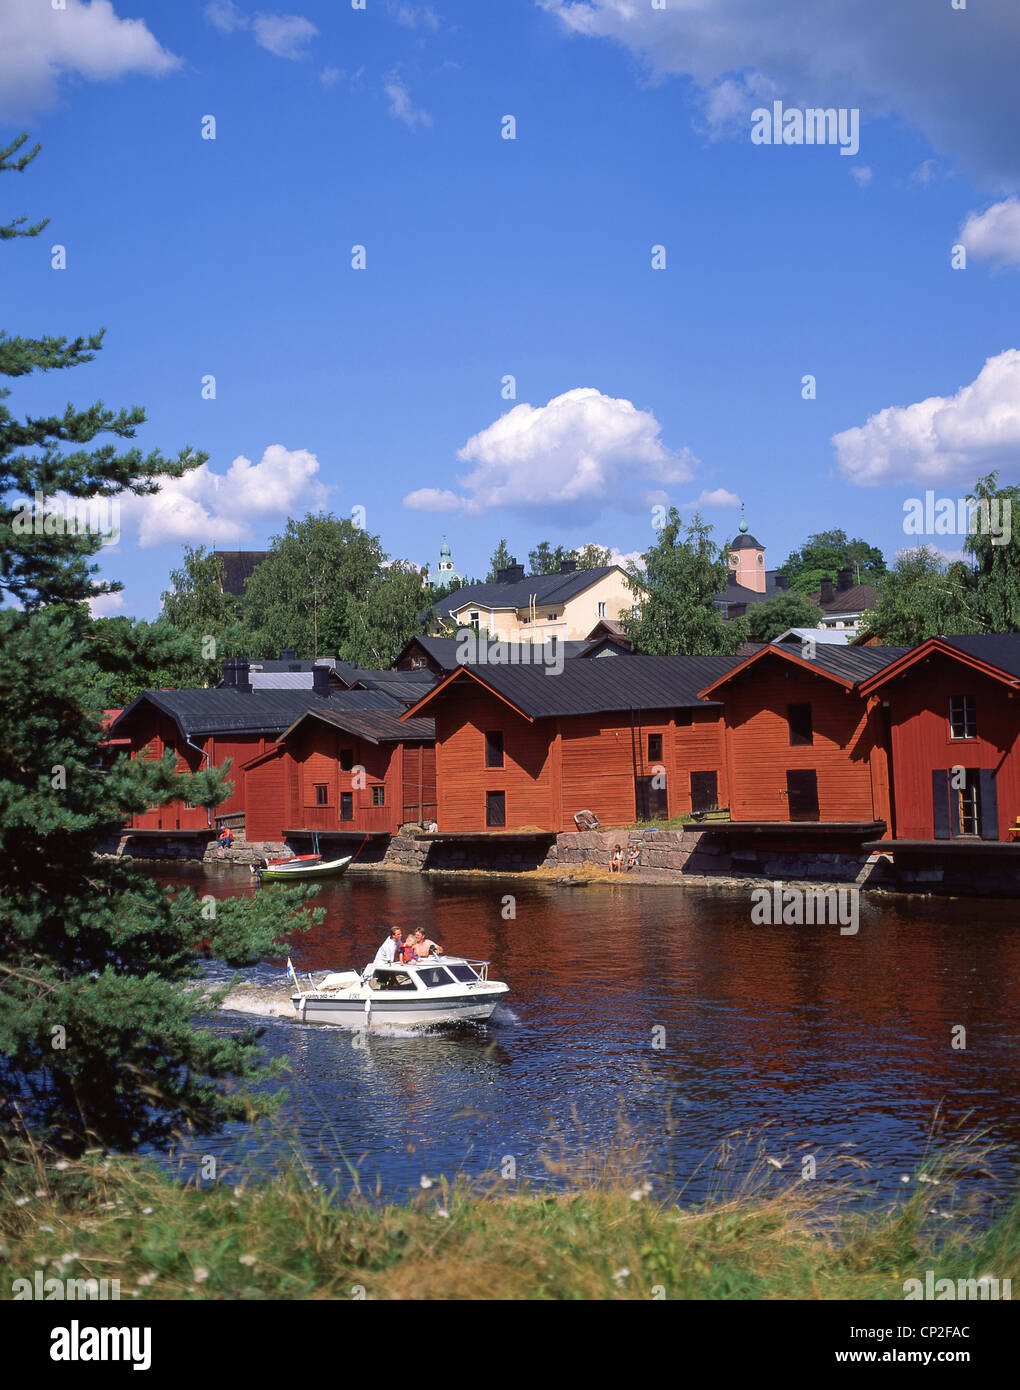 Waterfront warehouse buildings, Old Town, Porvoo, Uusimaa Region, Republic of Finland Stock Photo